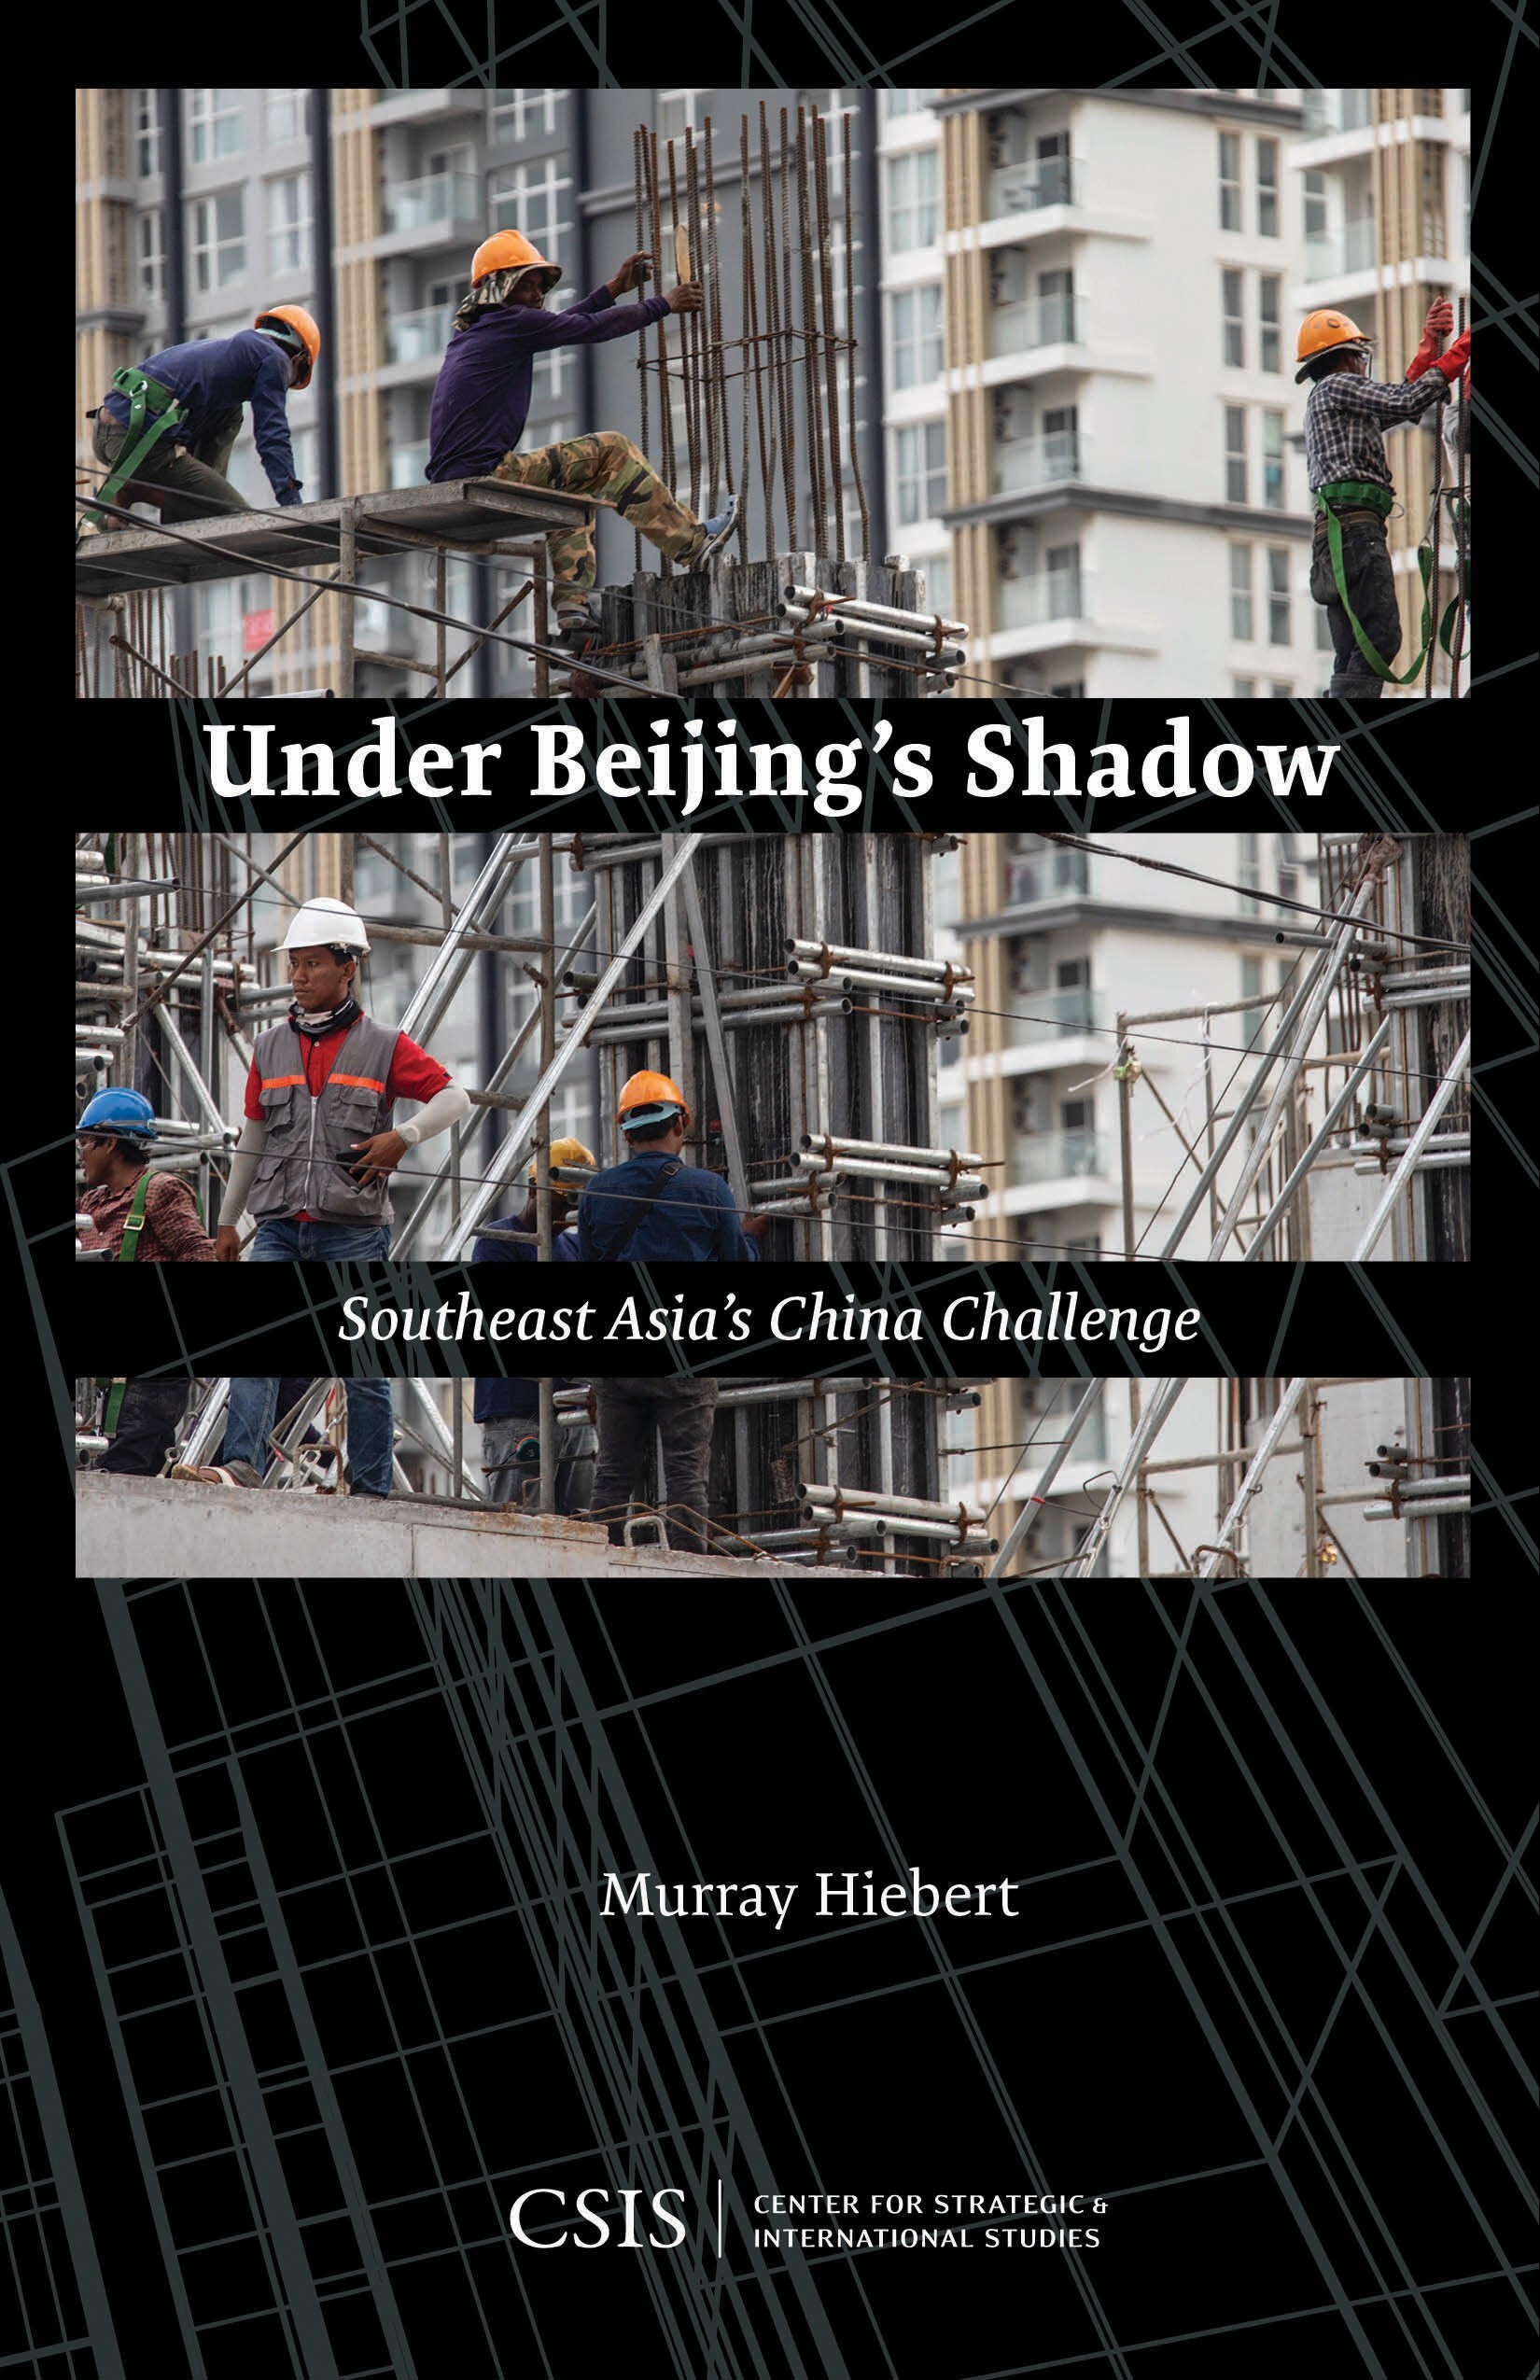 Under Beijing's Shadow: Southeast Asia's China Challenge, by Murray Hiebert.